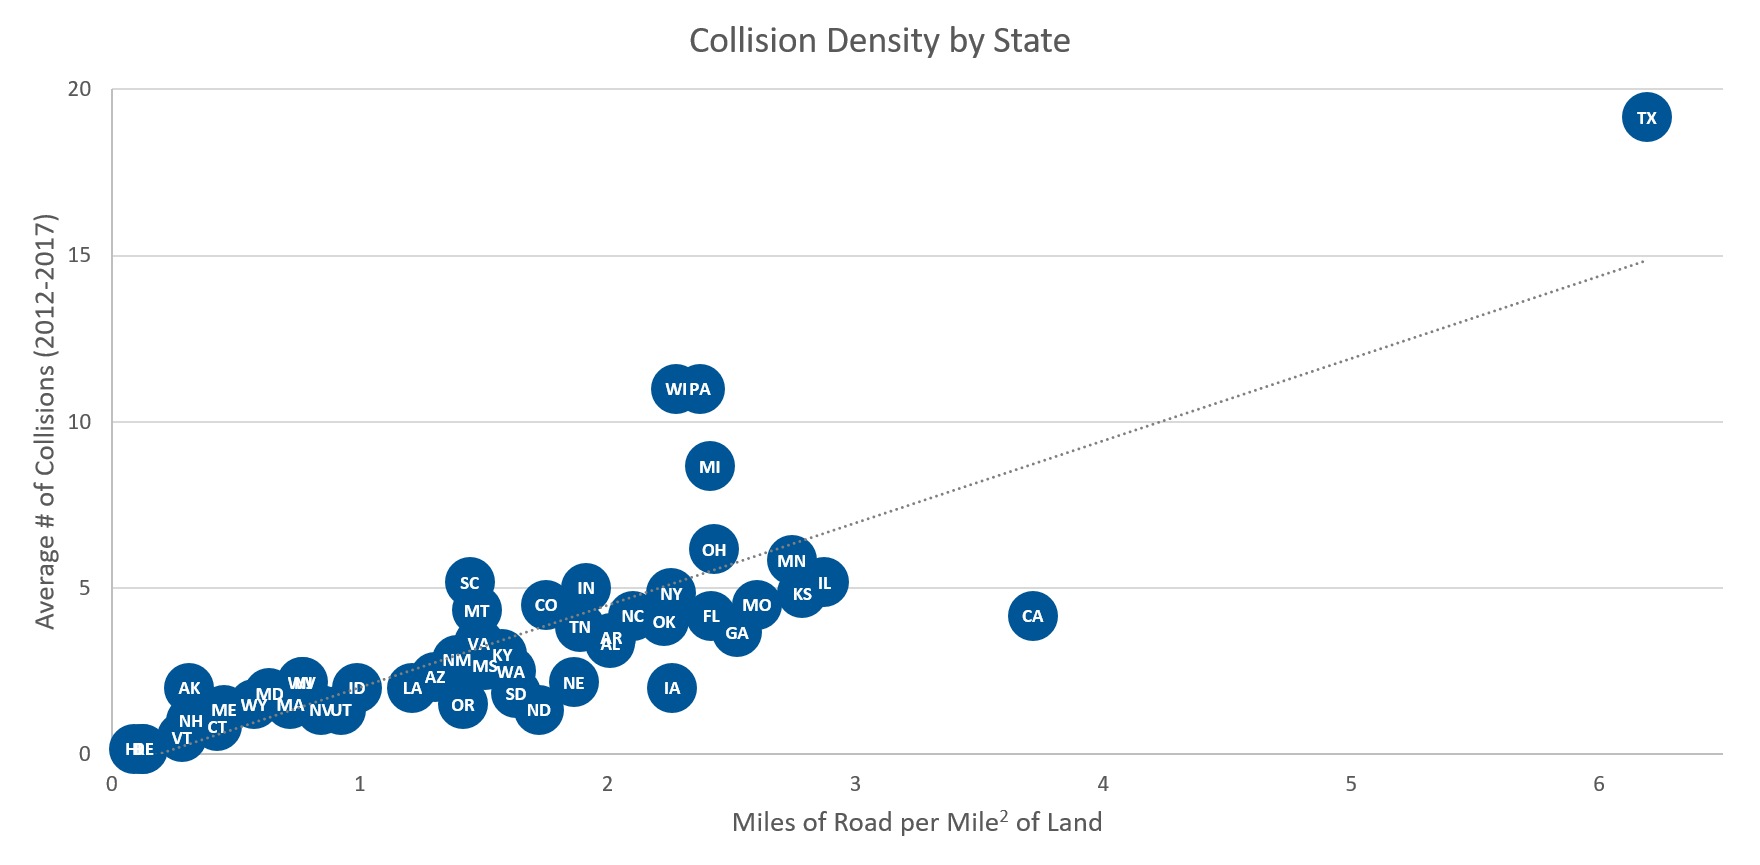 Collision density by state